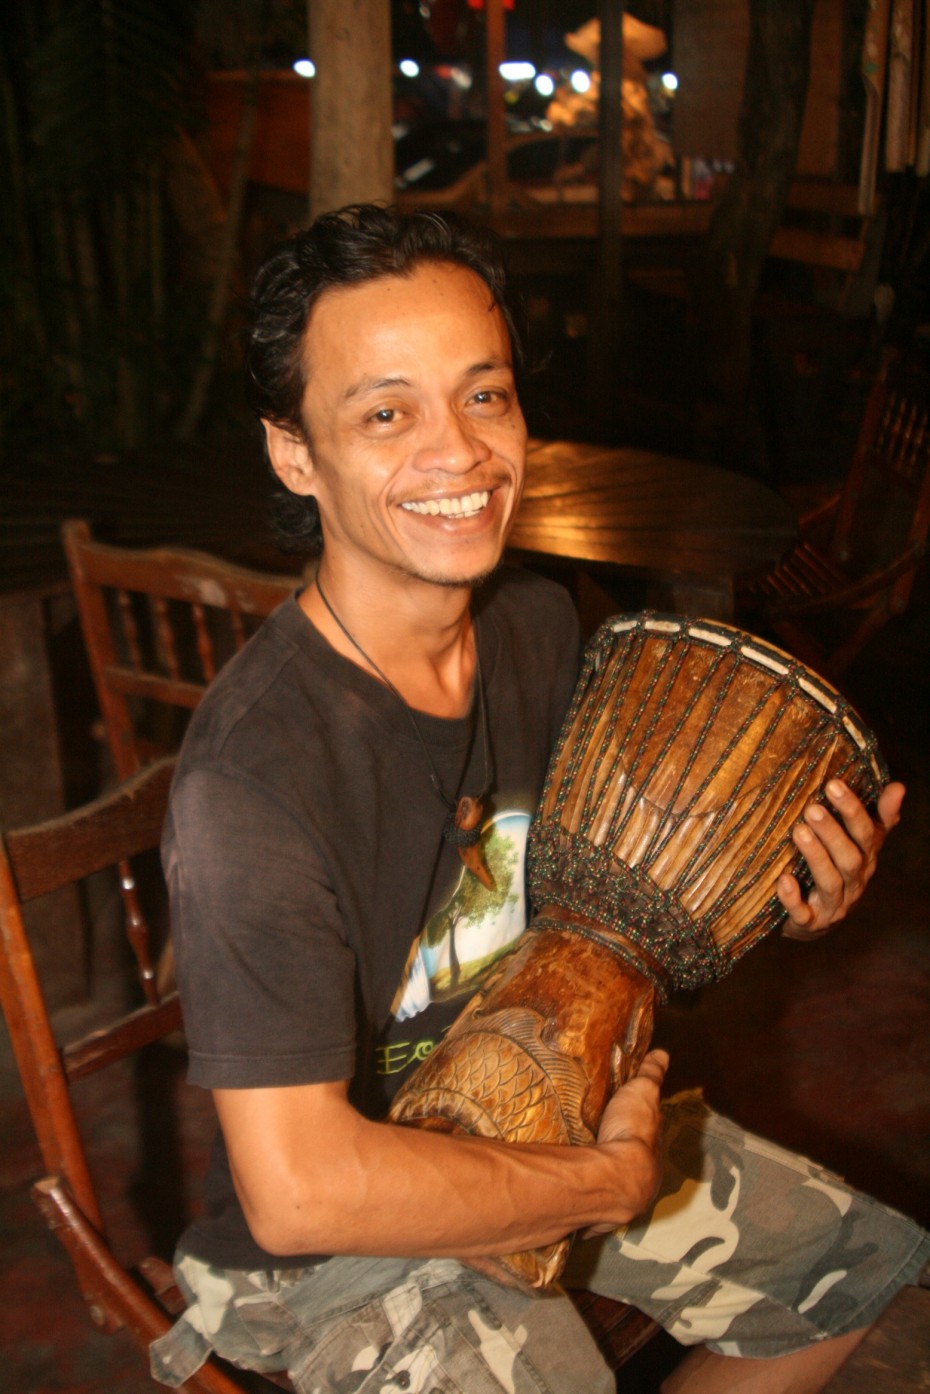 Syahril Azwan Salleh plays the djembe (pictured) with Cubit-Cubit Rindu whenever he has time to spare.